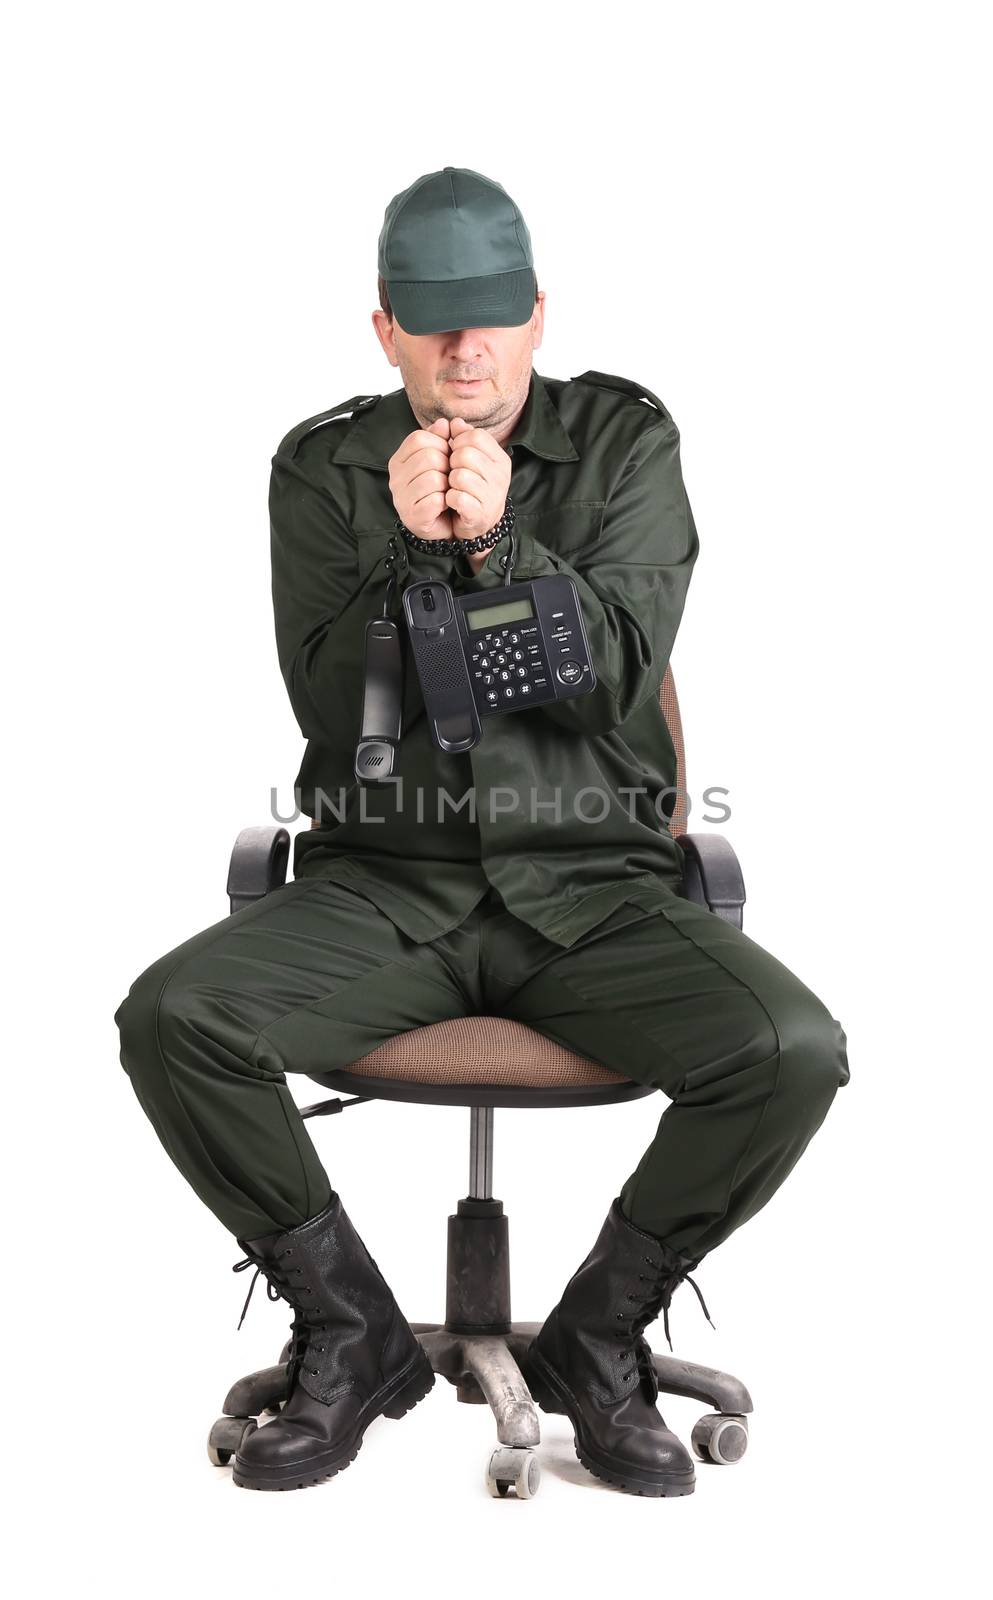 Man in workwear tied up with phone. Isolated on a white background.